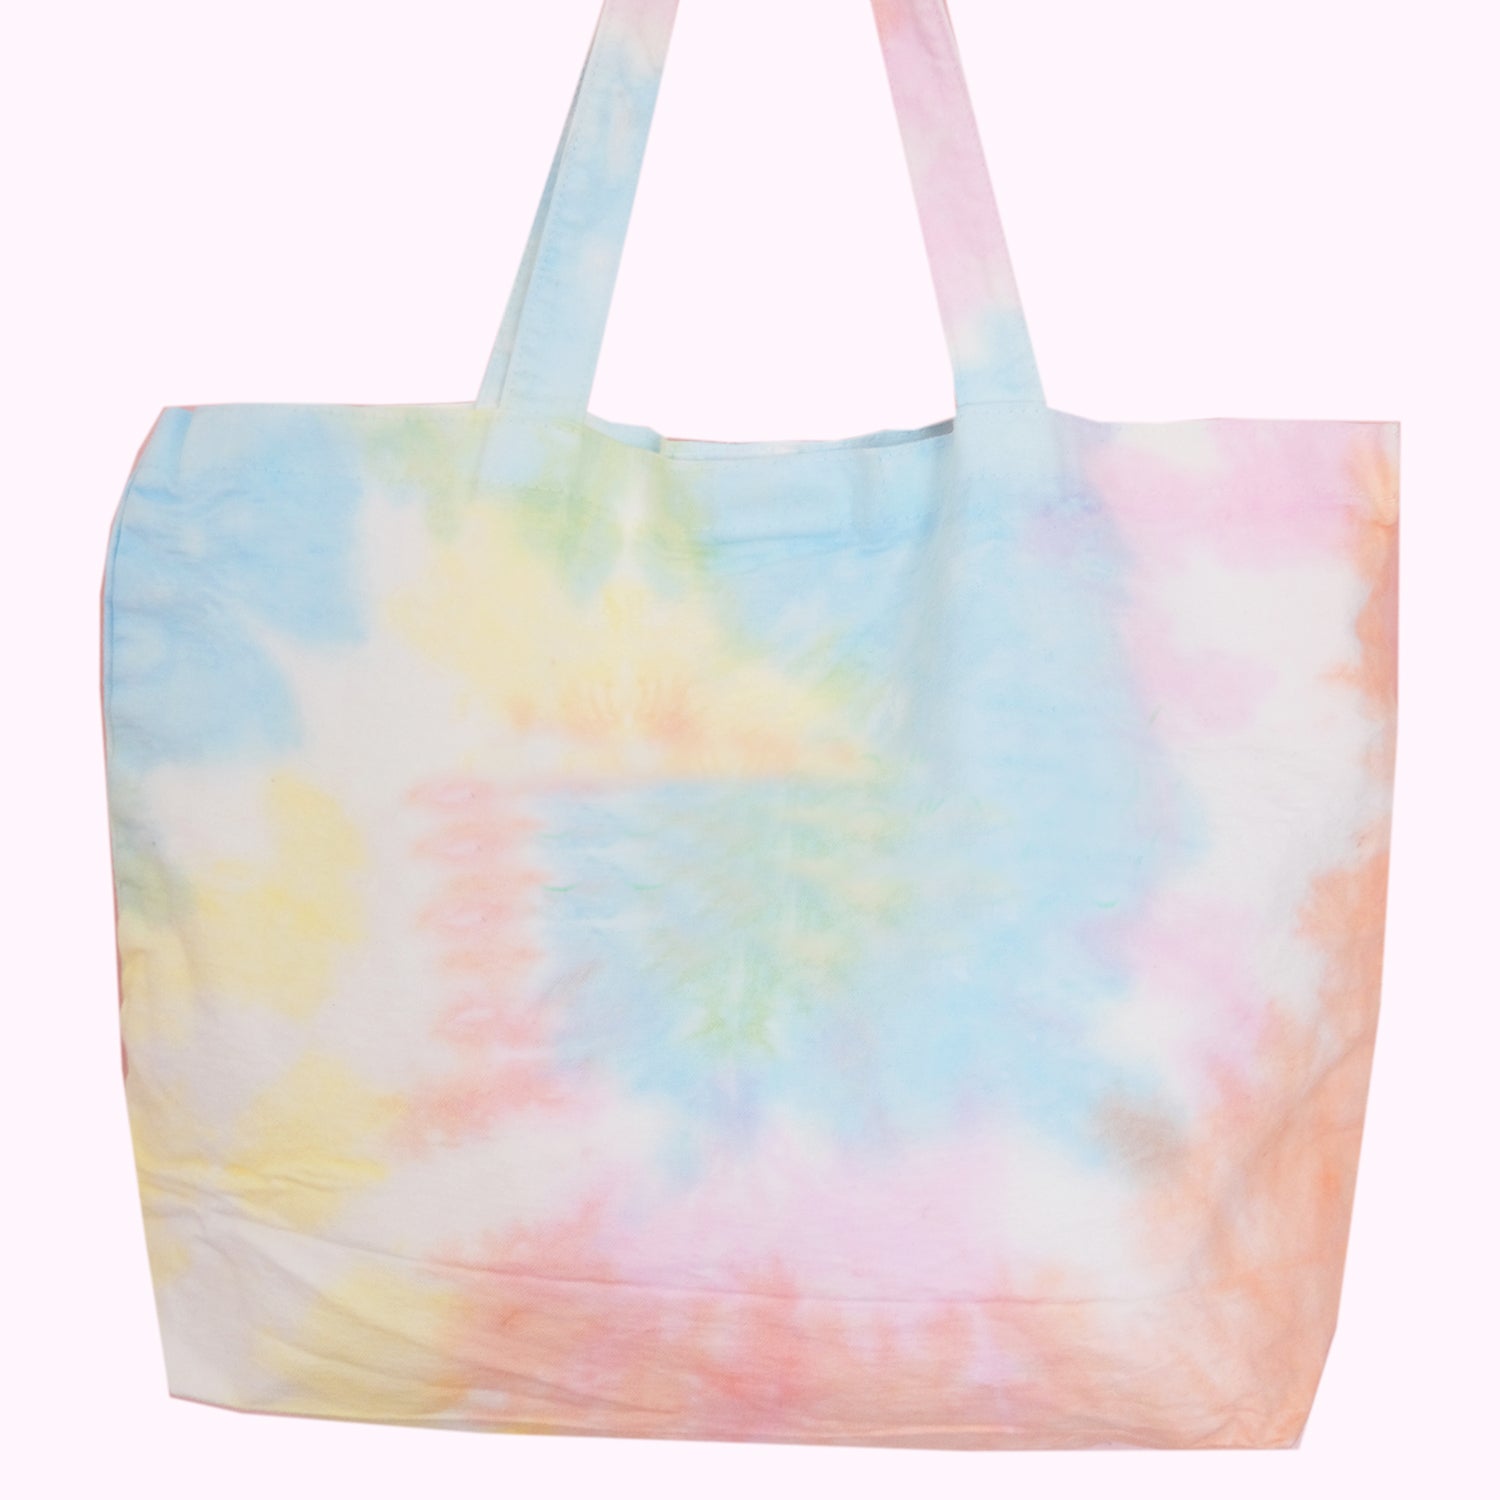 i can finally give my tie dye tote a break 😭 loving this color so so